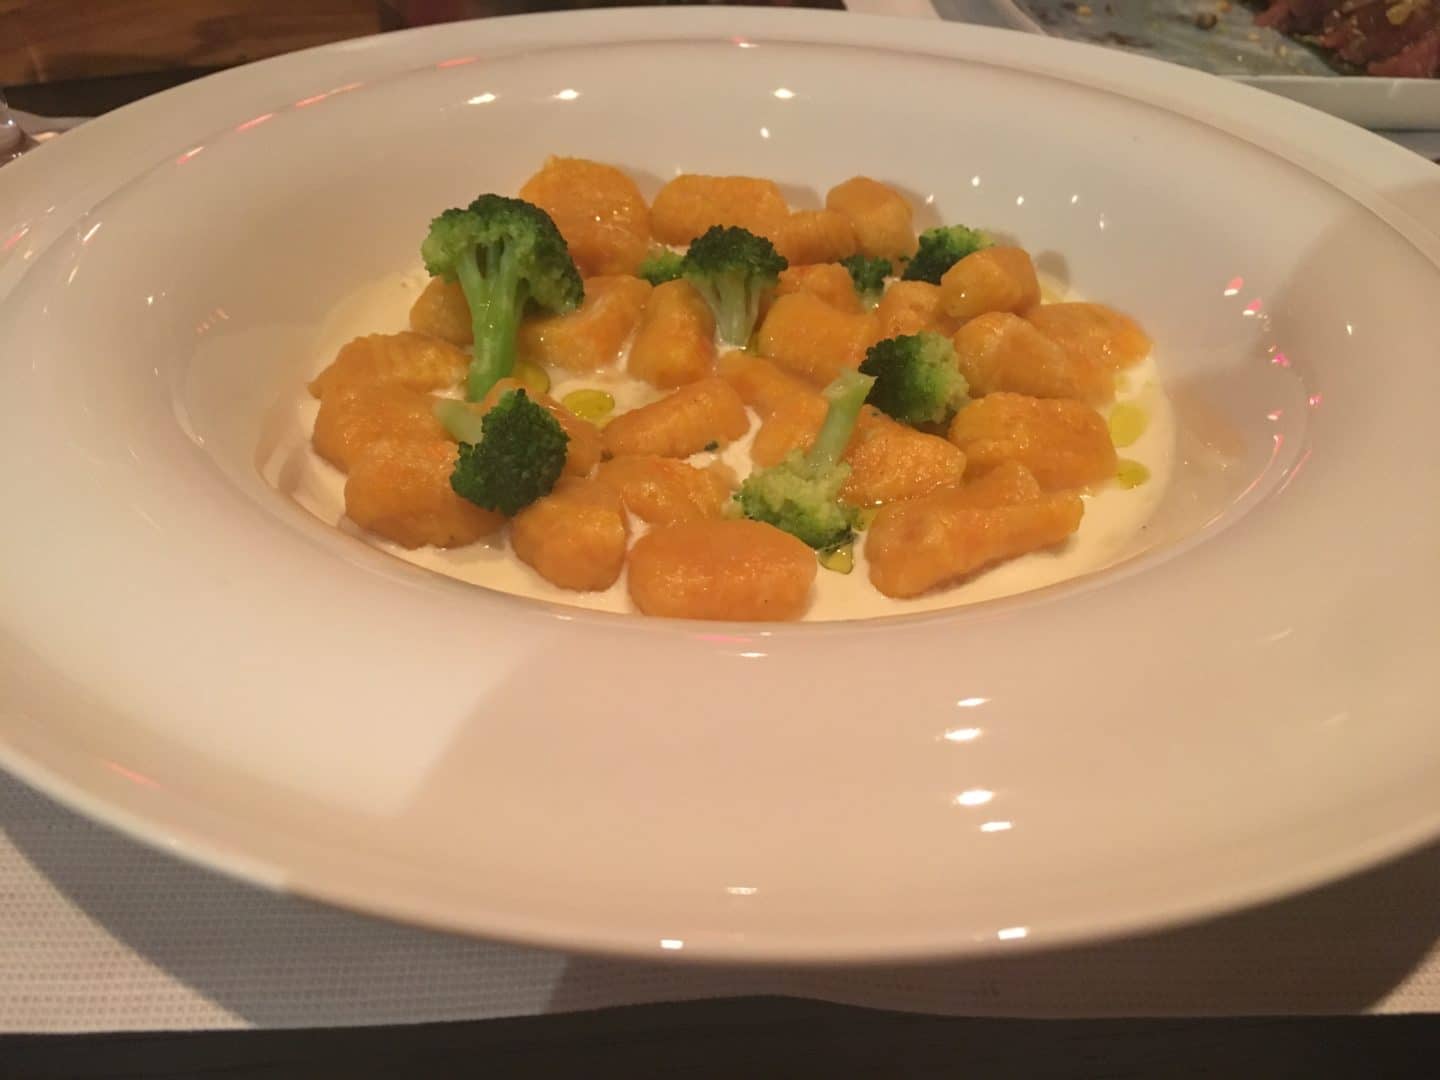 Fine Dining Restaurants in Florence, Gnocchi in autunno Homemade pumpkin gnocchi, with “taleggio” cheese sauce and broccol